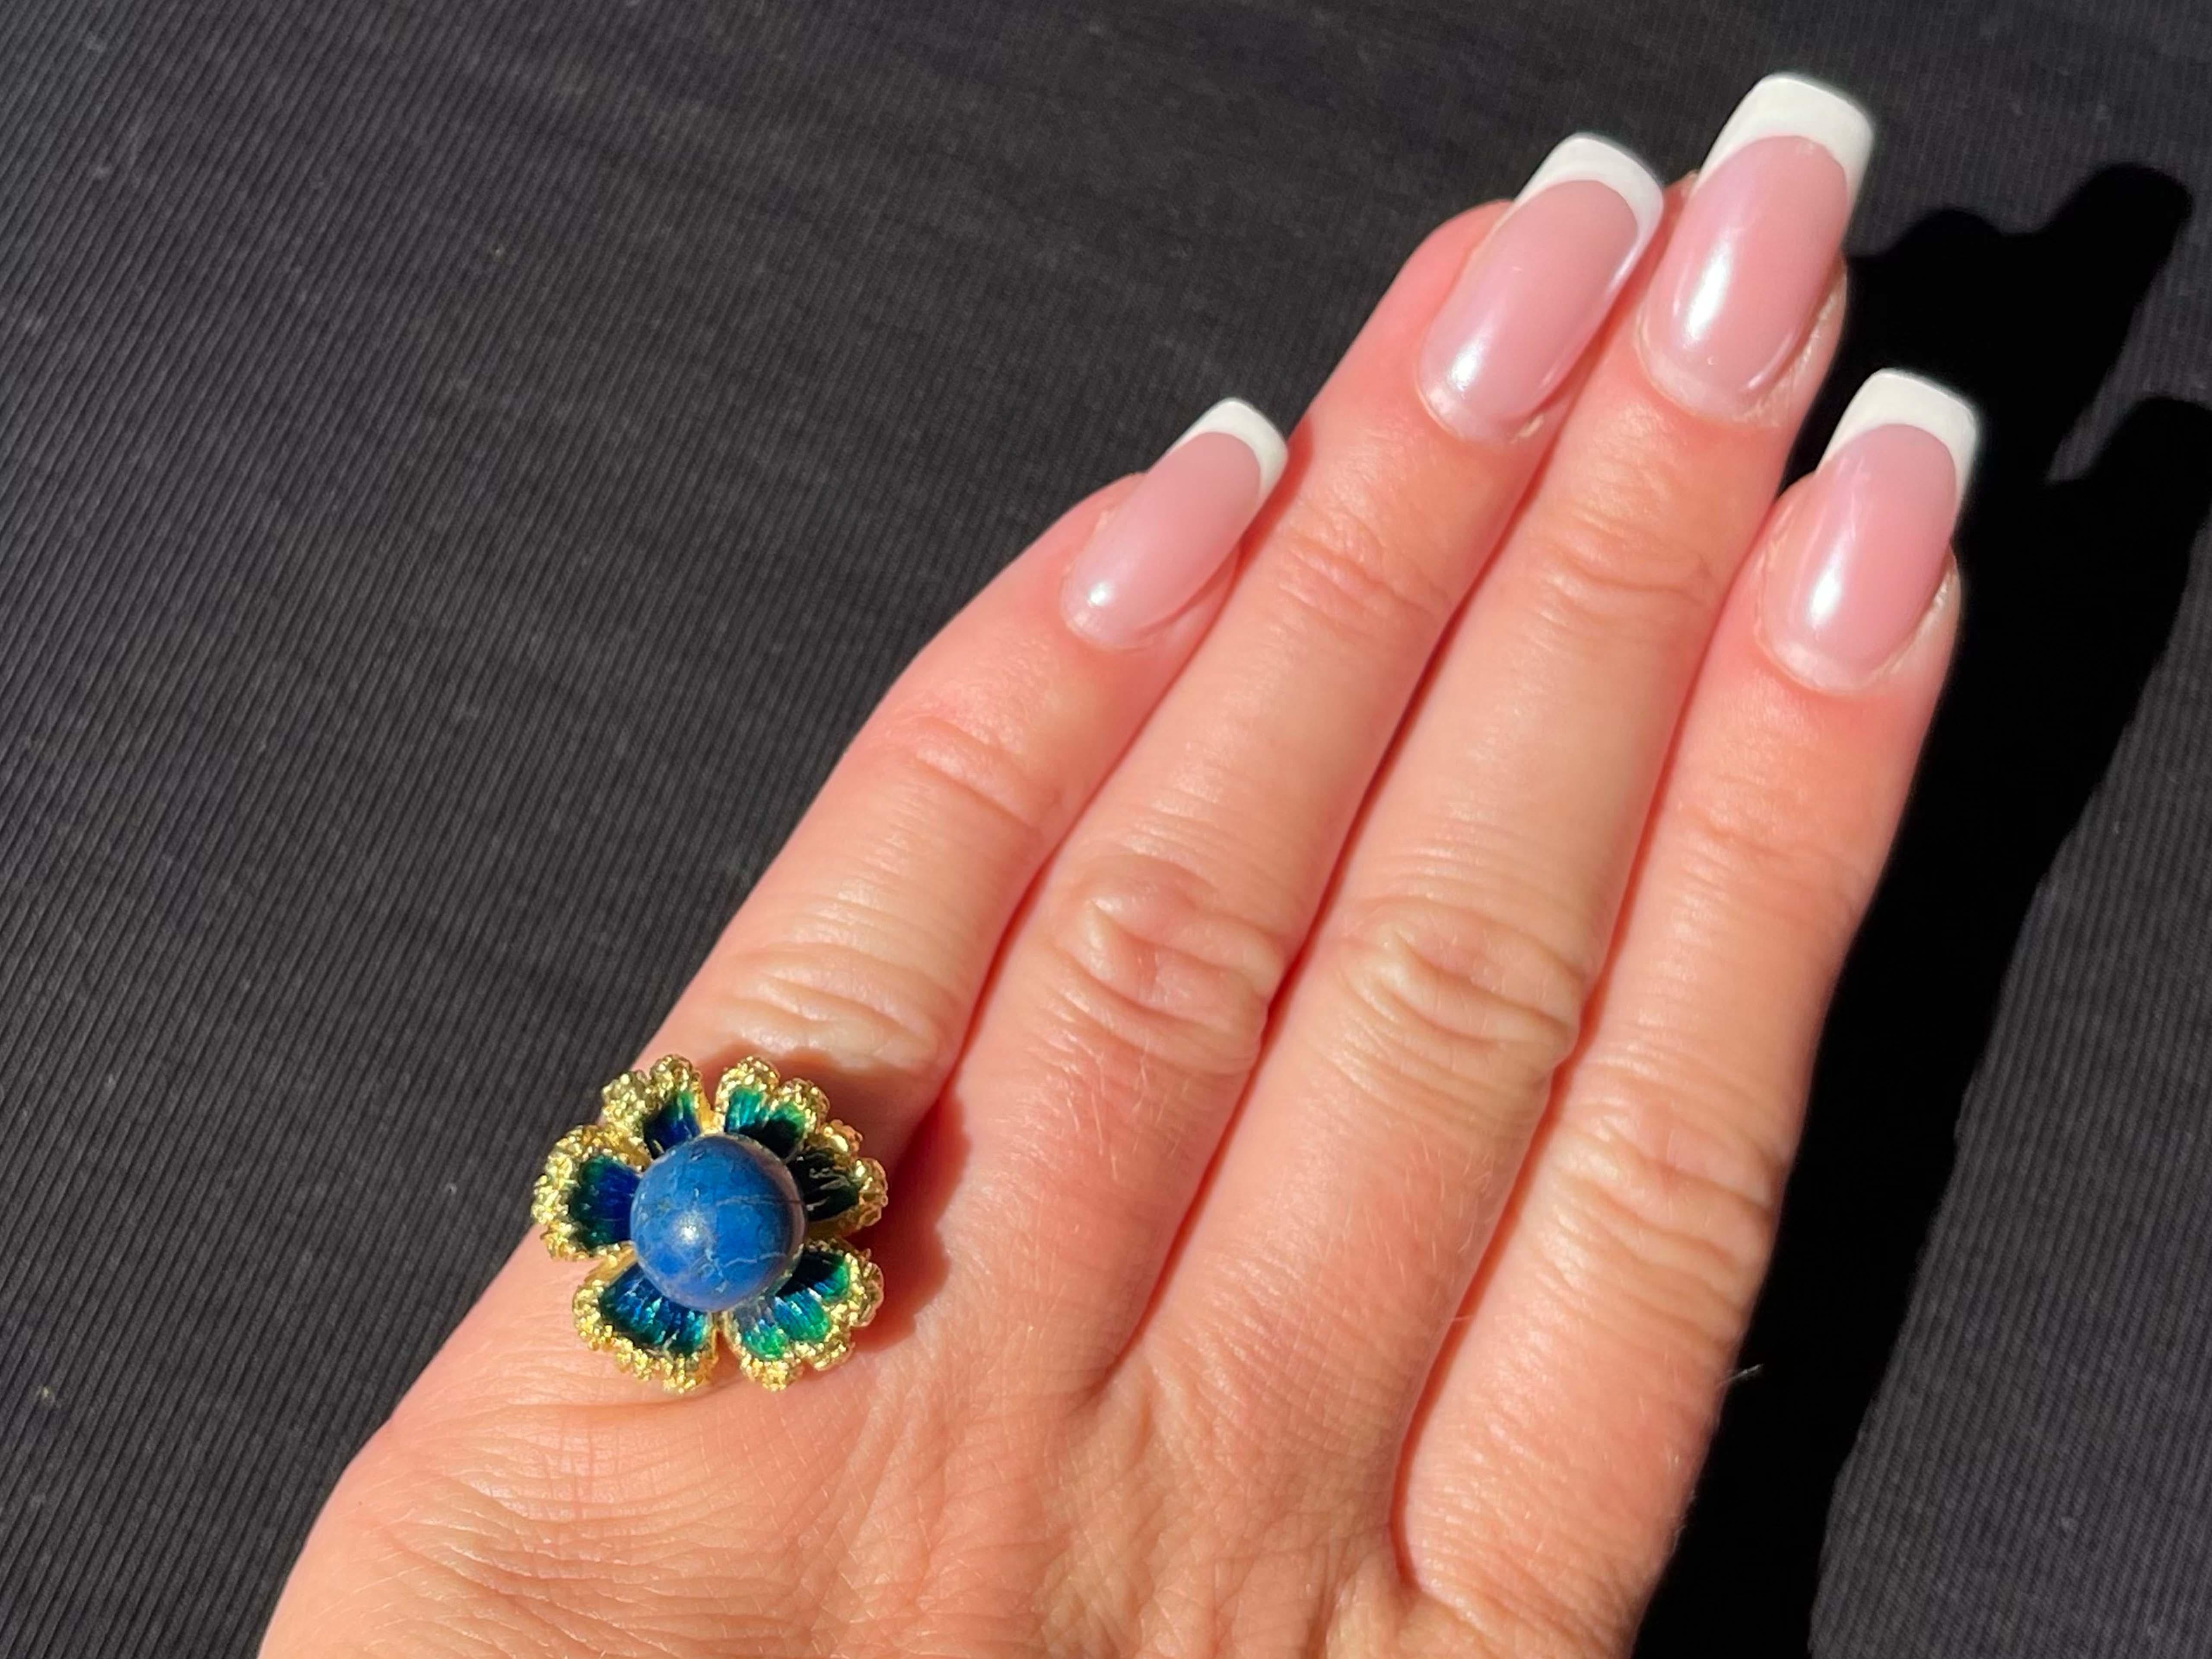 Item Specifications:

Metal: 18K Yellow Gold

Style: Statement Ring

Ring Size: 4.5 (resizing available for a fee)

Total Weight: 11.2 Grams

Gemstone Specifications:

Gemstones: 1 blue lapis lazuli

Condition: Preowned, excellent

Stamped: 